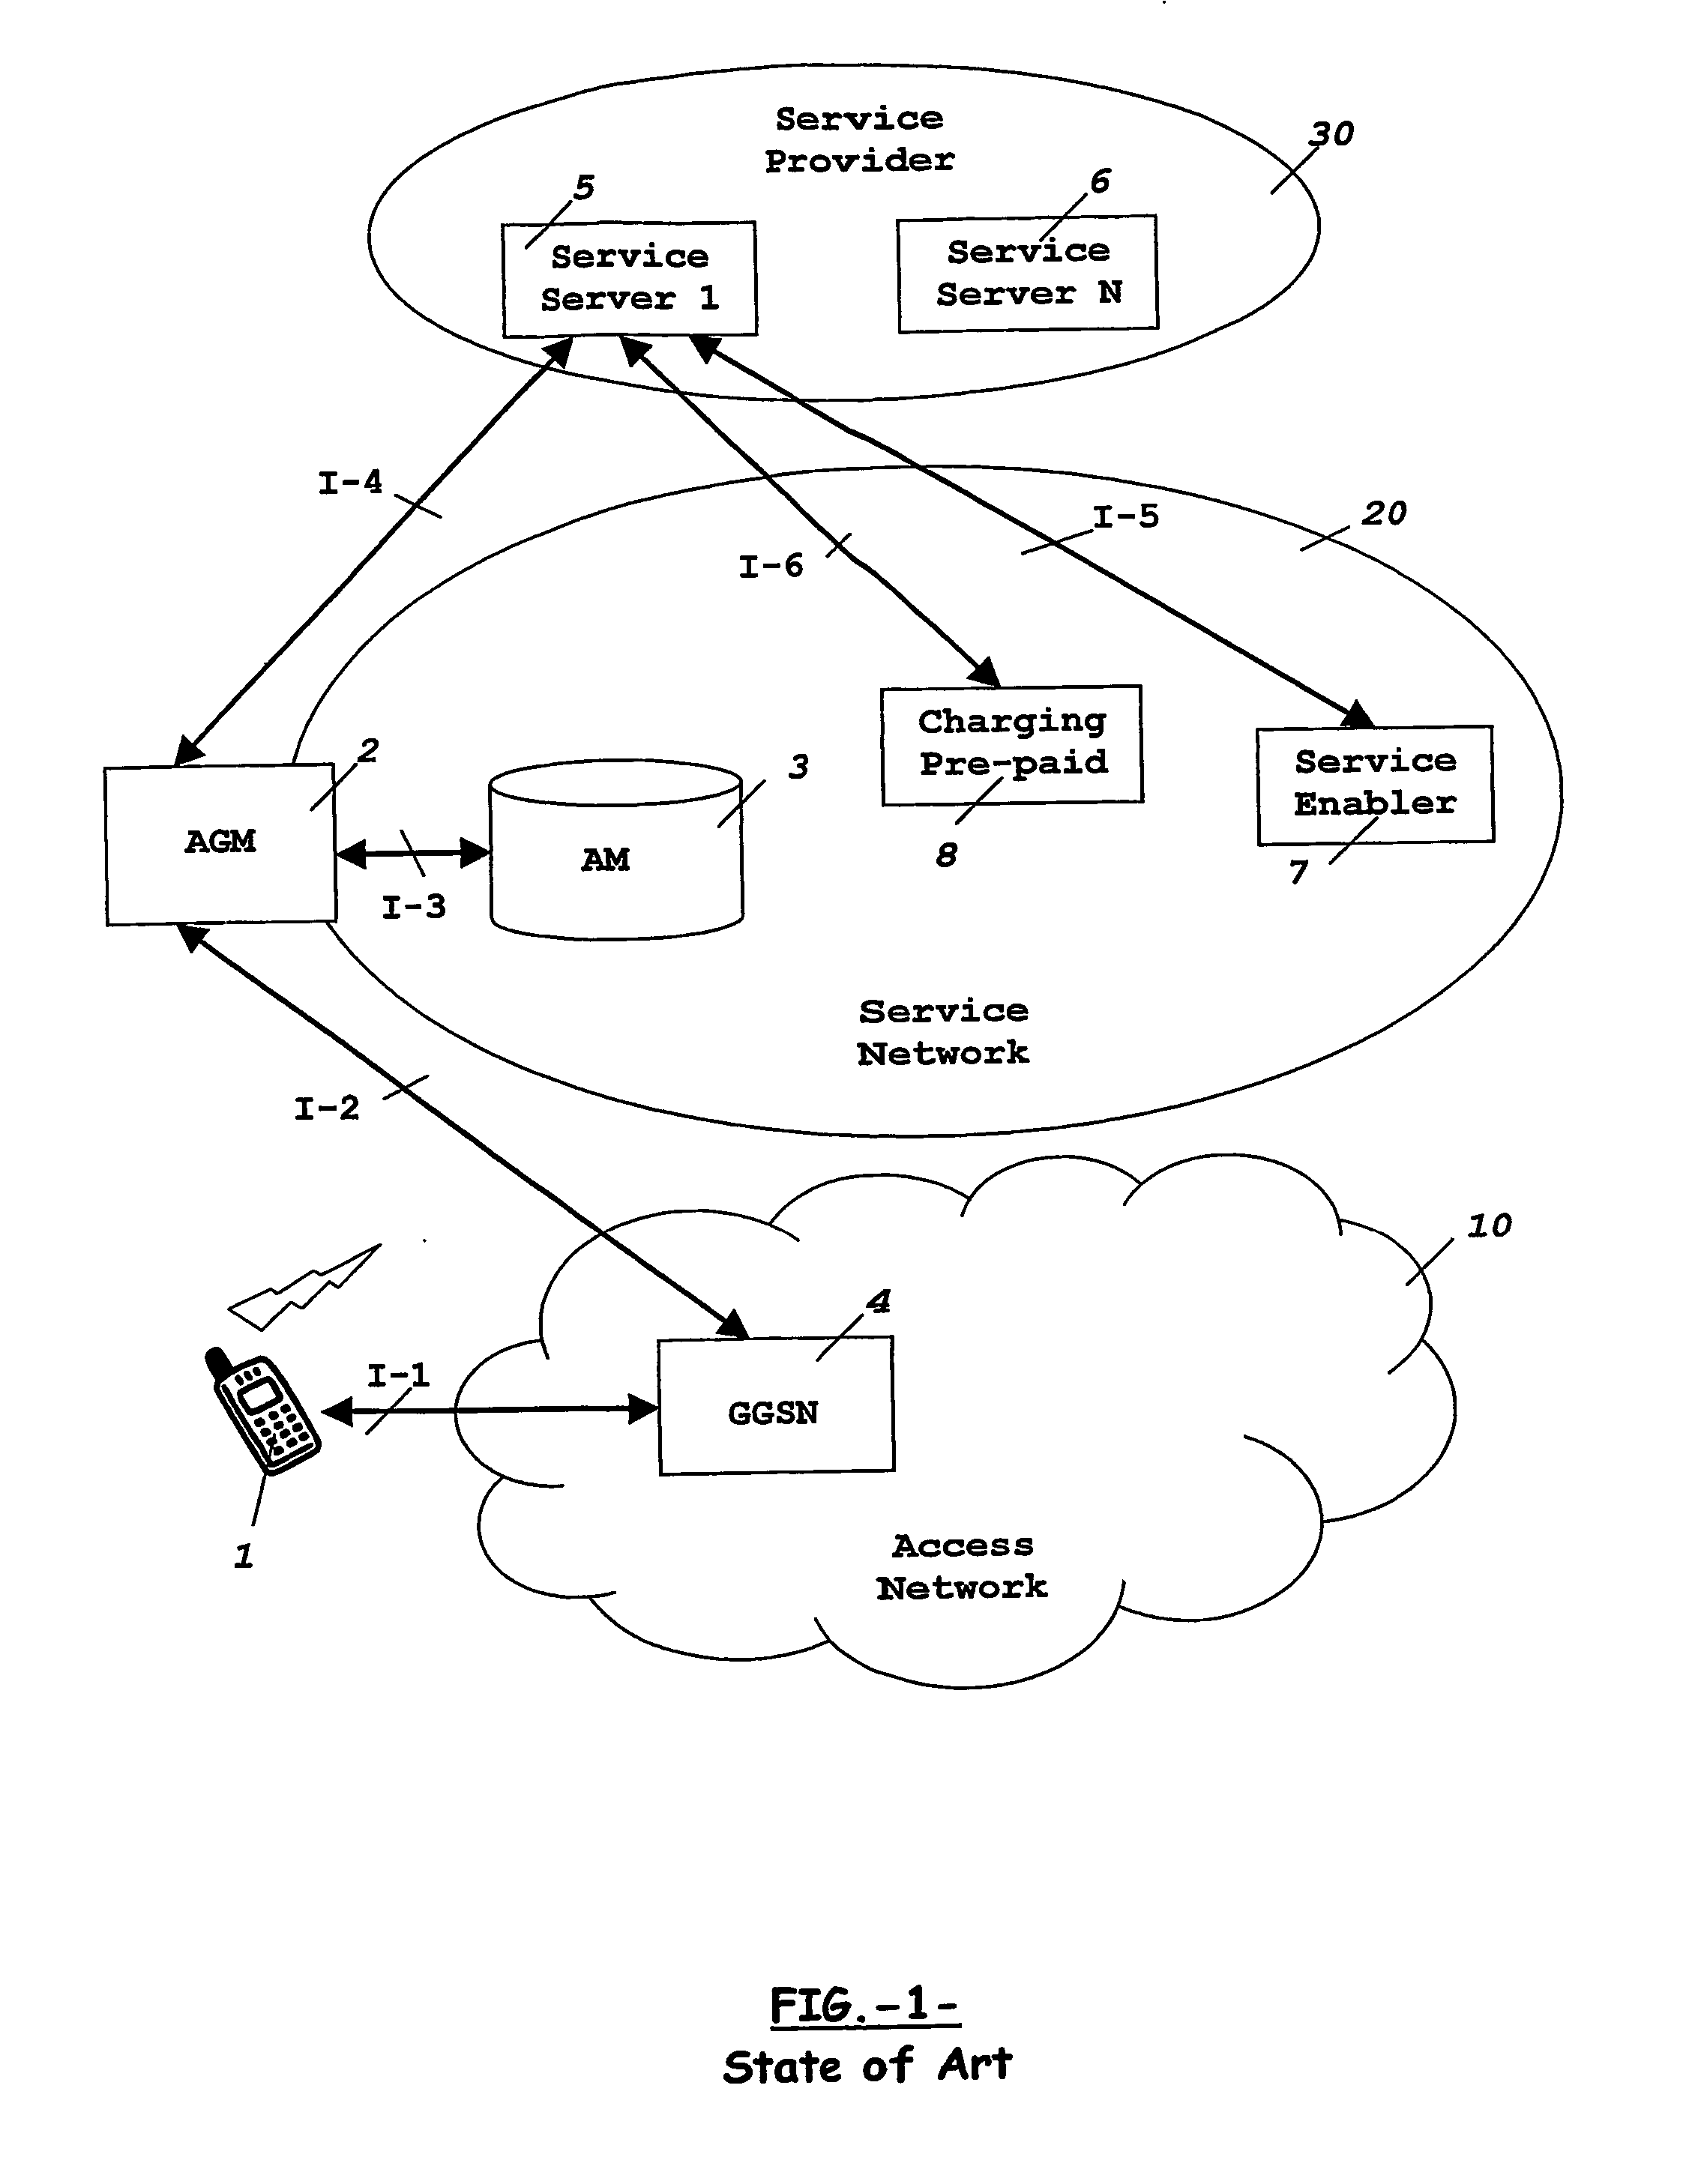 Means and method for controlling service progression between different domains